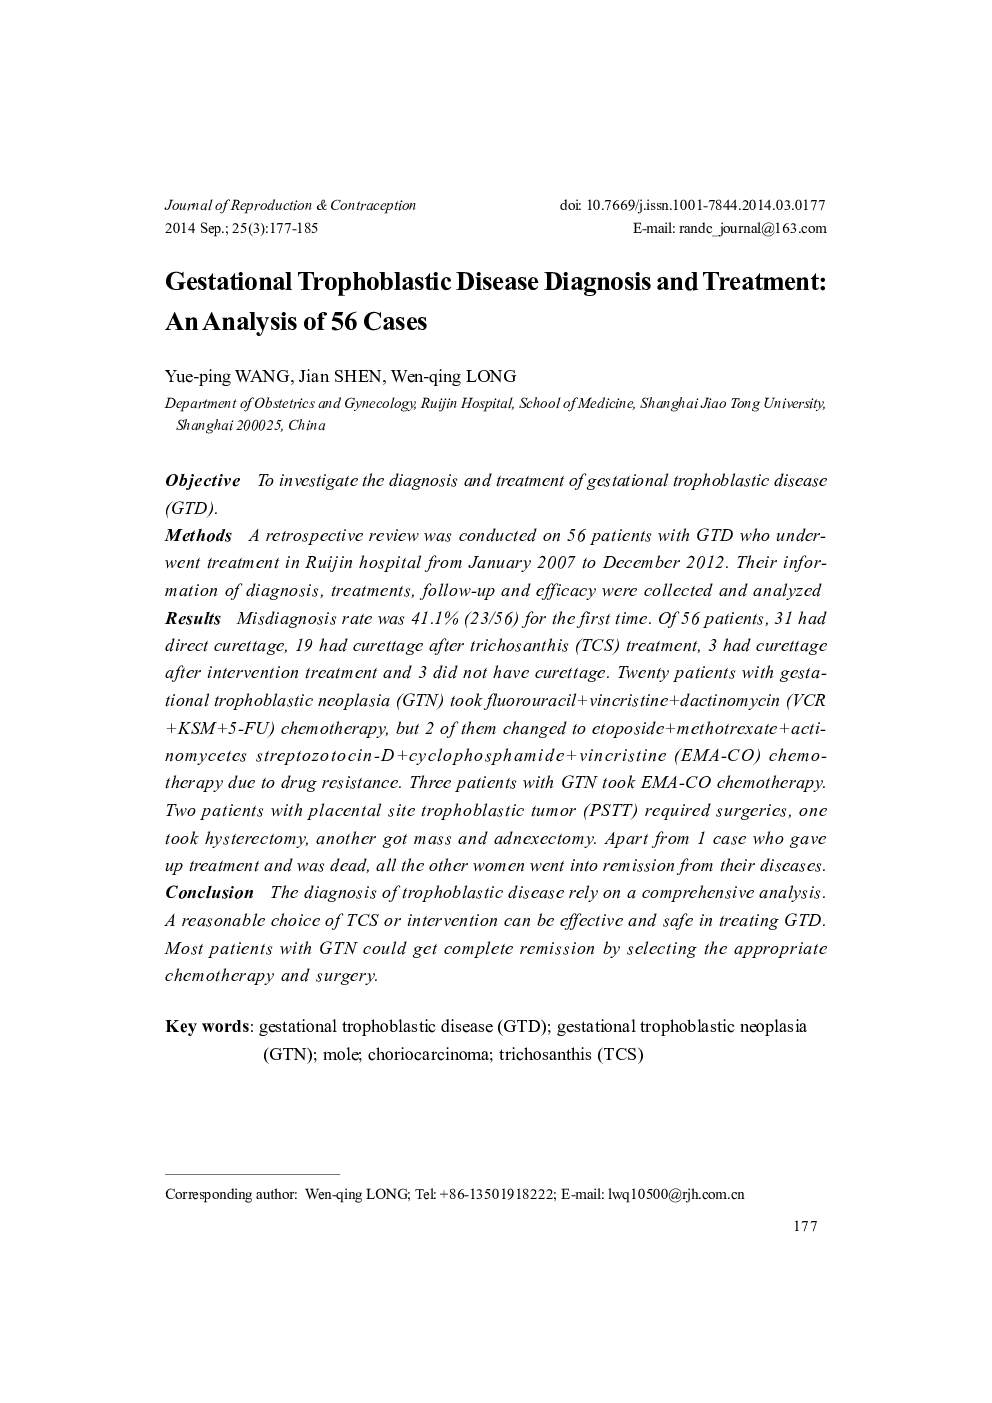 Gestational Trophoblastic Disease Diagnosis and Treatment: An Analysis of 56 Cases